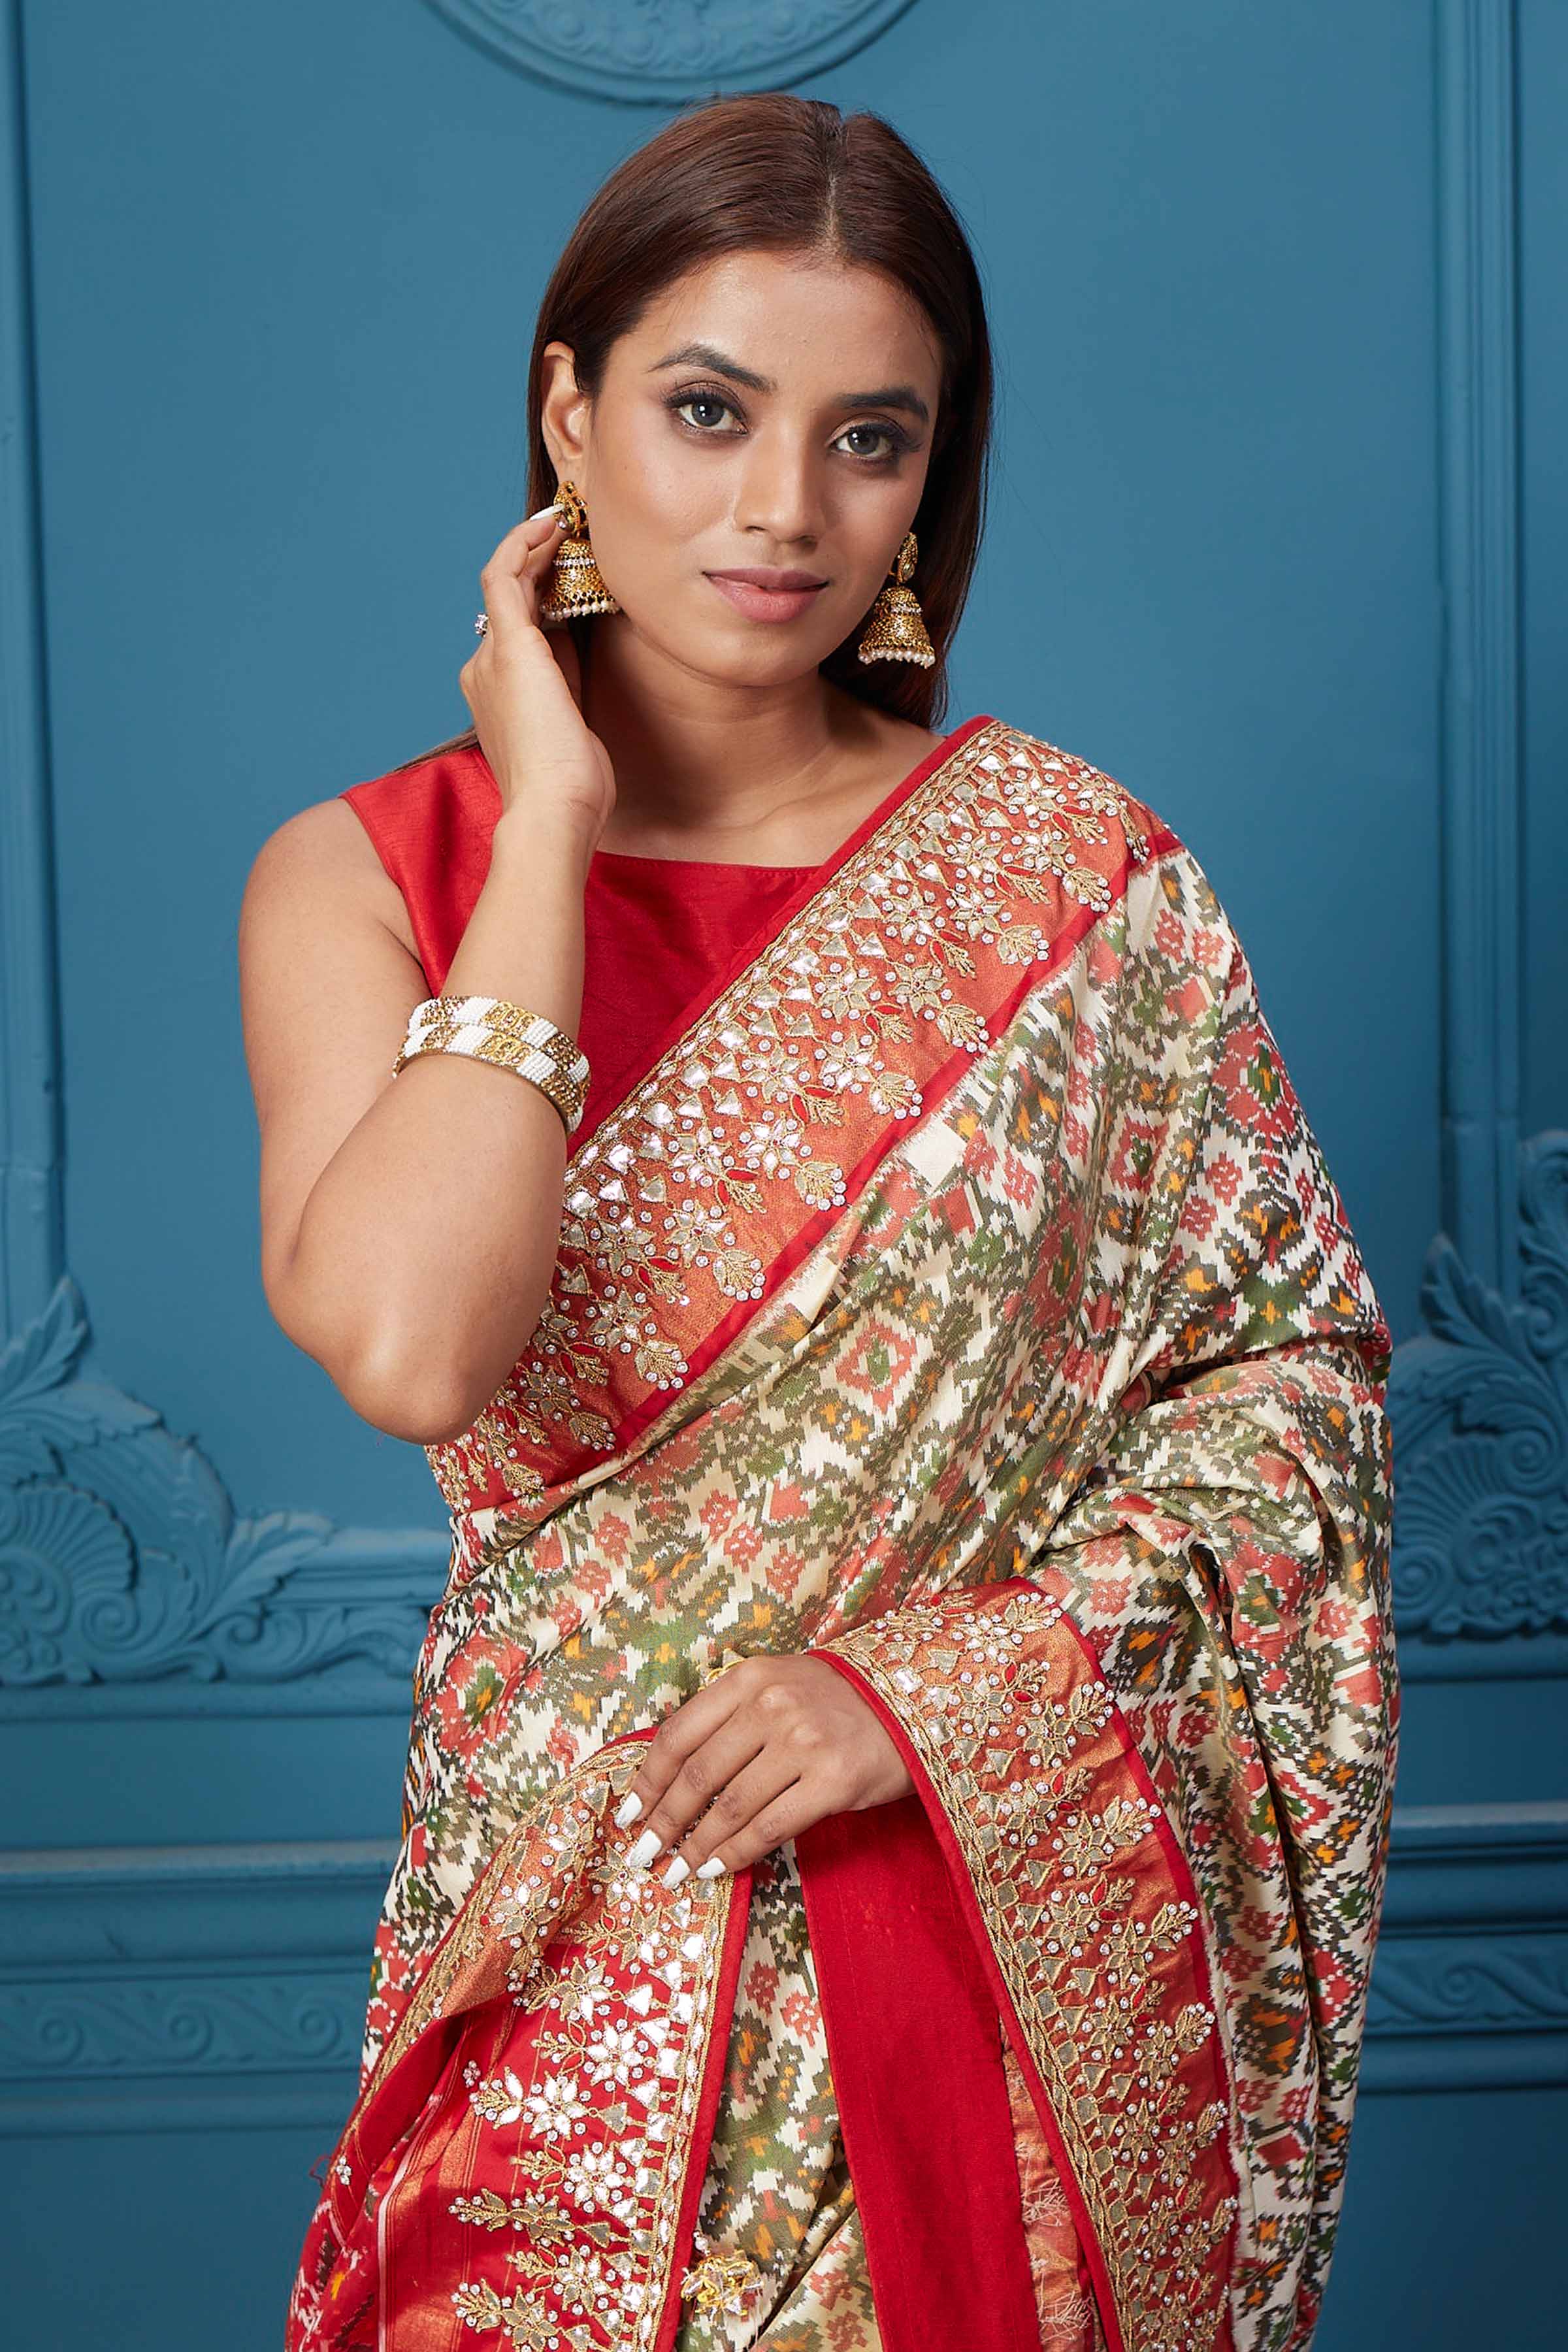 Buy off-white Patola silk saree online in USA with red embroidered border and saree blouse. Look royal at weddings and festive occasions in exquisite designer sarees, handwoven sarees, pure silk saris, Banarasi sarees, Kanchipuram silk sarees from Pure Elegance Indian saree store in USA. -closeup